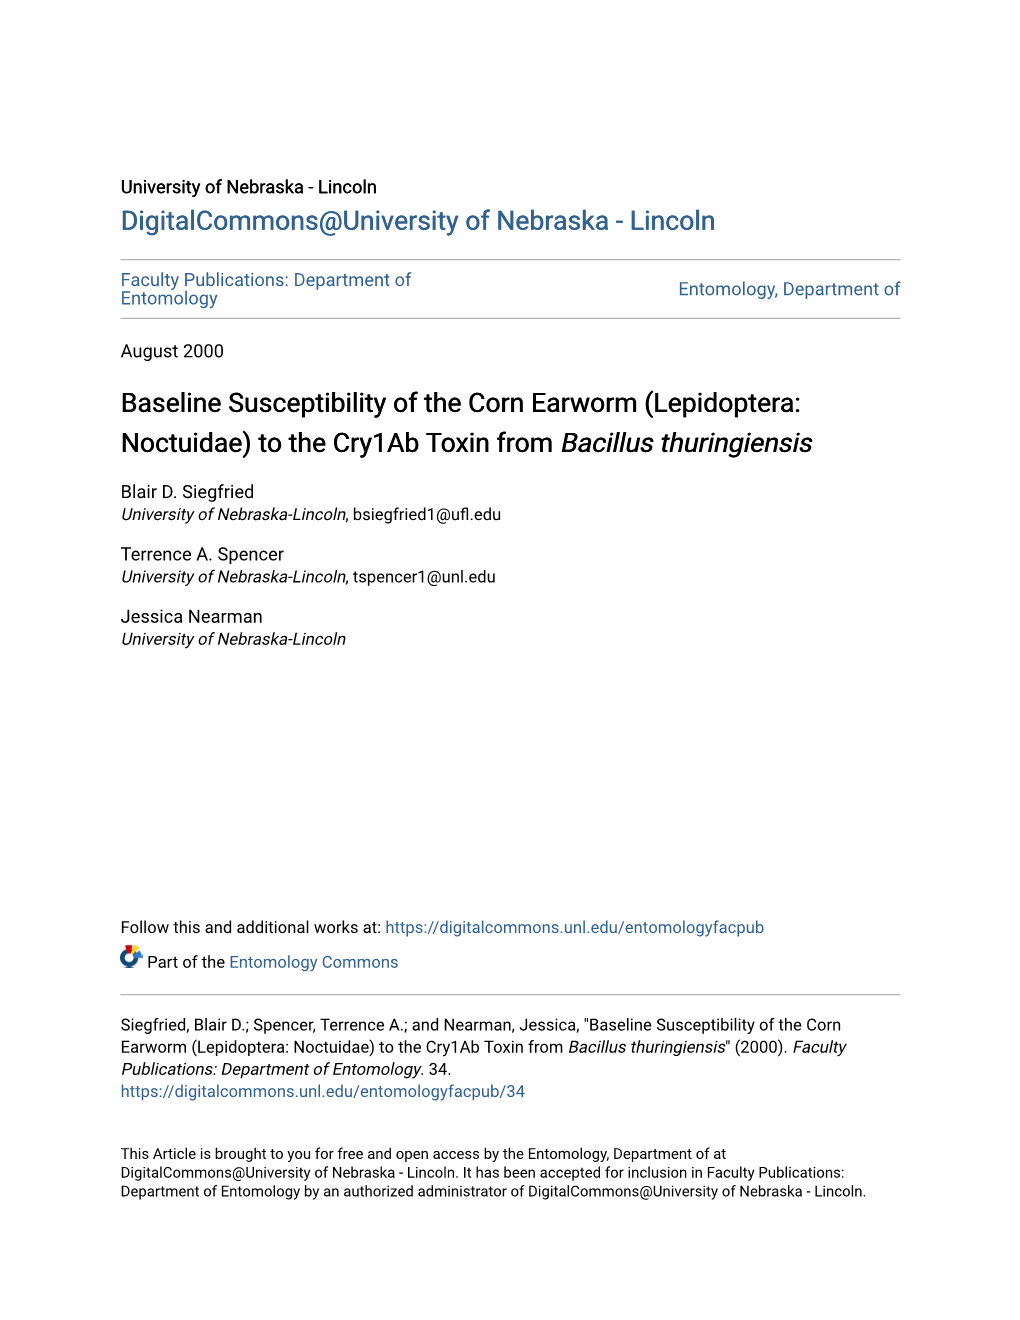 Baseline Susceptibility of the Corn Earworm (Lepidoptera: Noctuidae) to the Cry1ab Toxin from Bacillus Thuringiensis